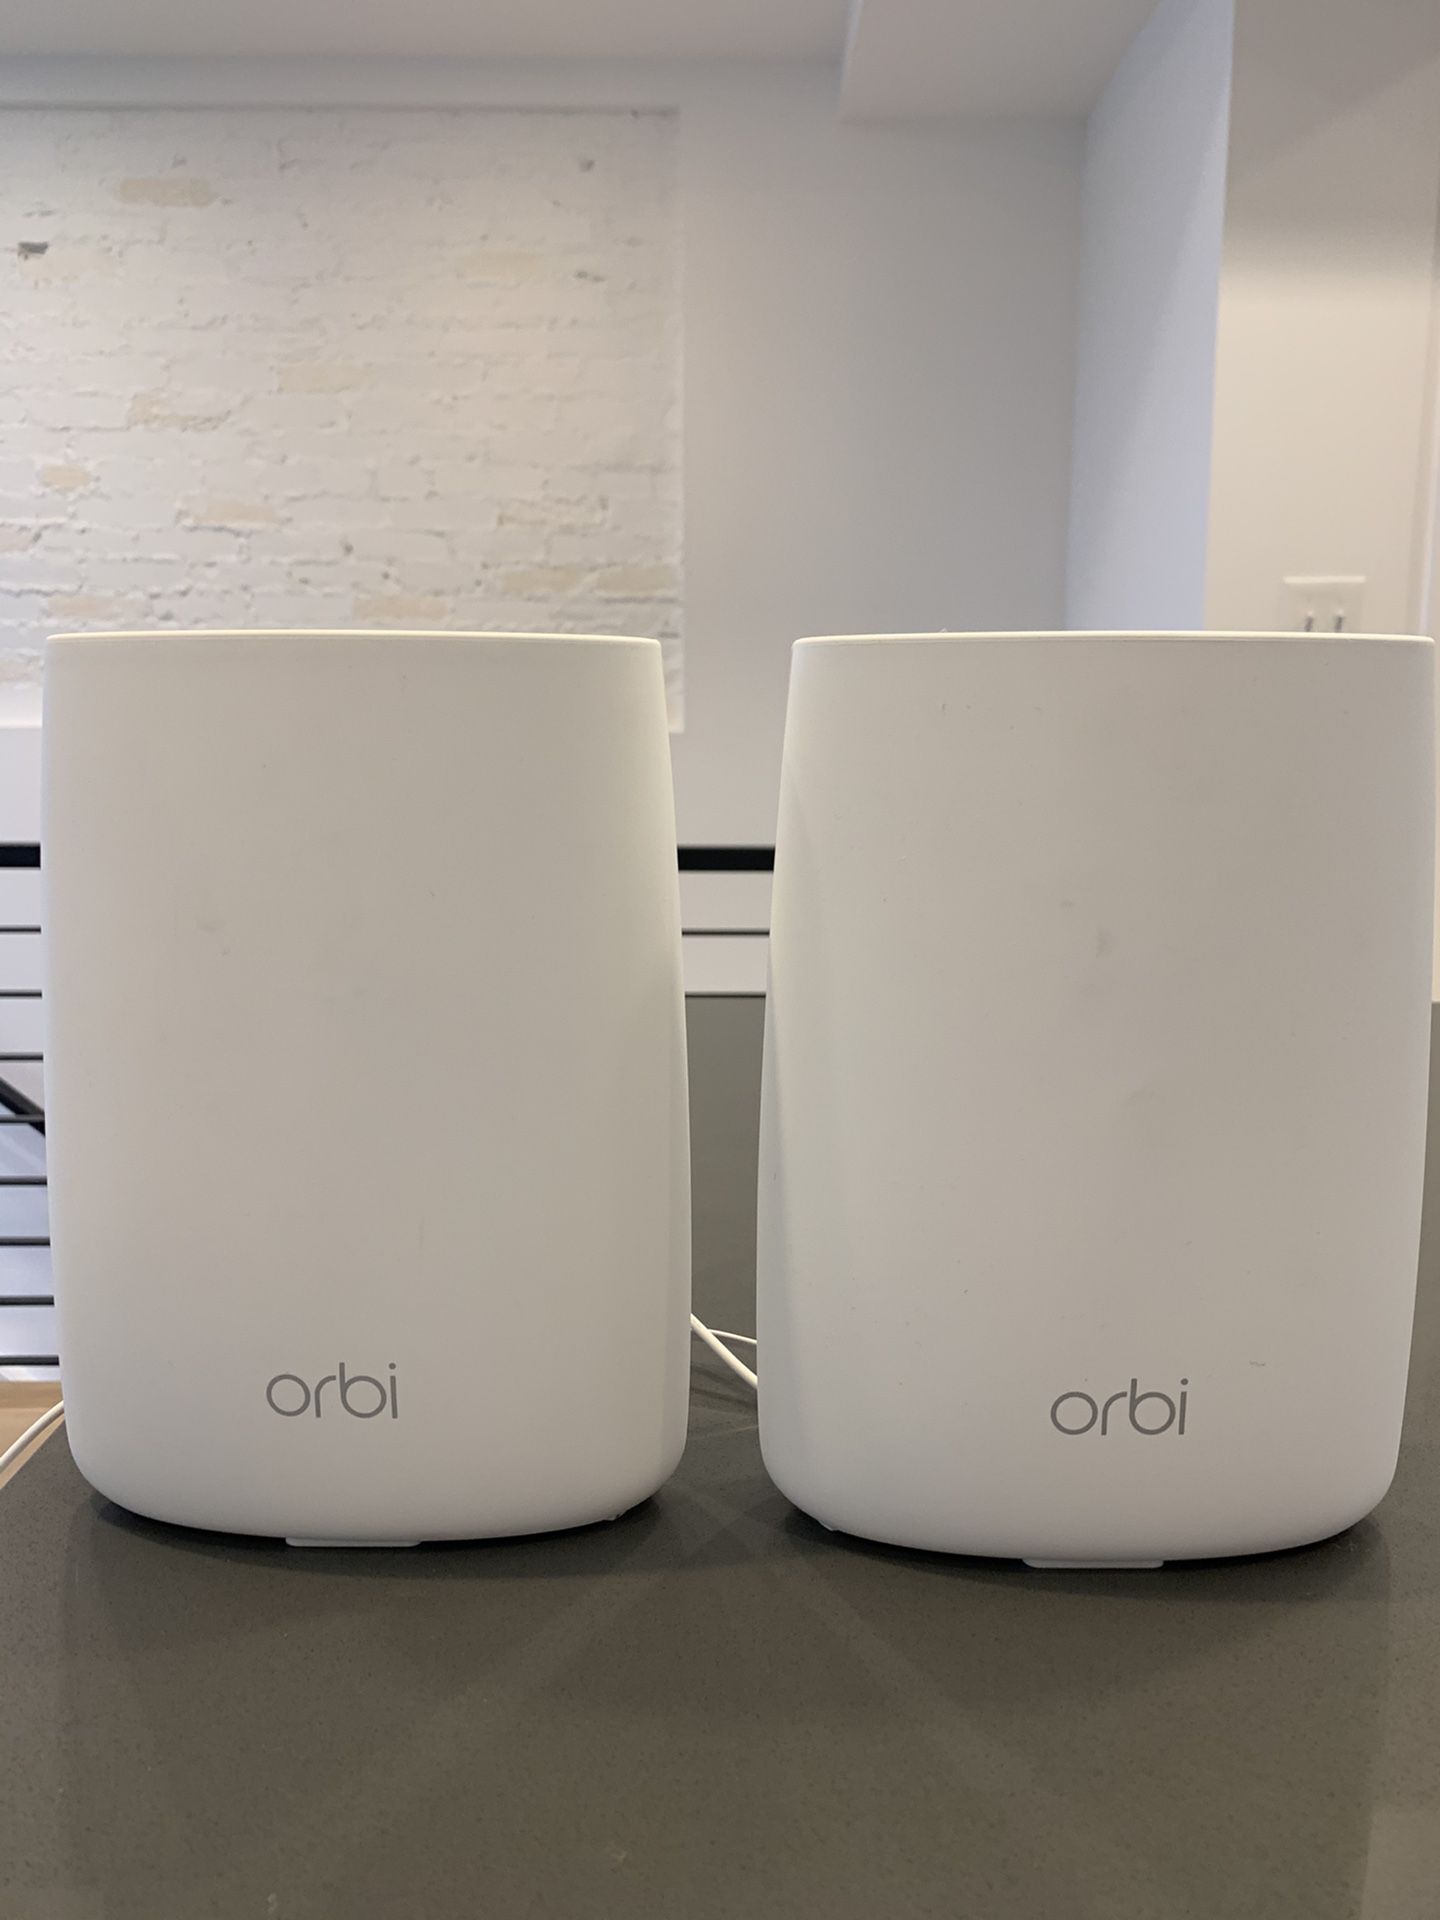 NETGEAR Orbi Tri-band Whole Home Mesh WiFi System with 3Gbps Speed (RBK50) – Router & Extender Replacement Covers Up to 5,000 sq. ft., 2-Pack